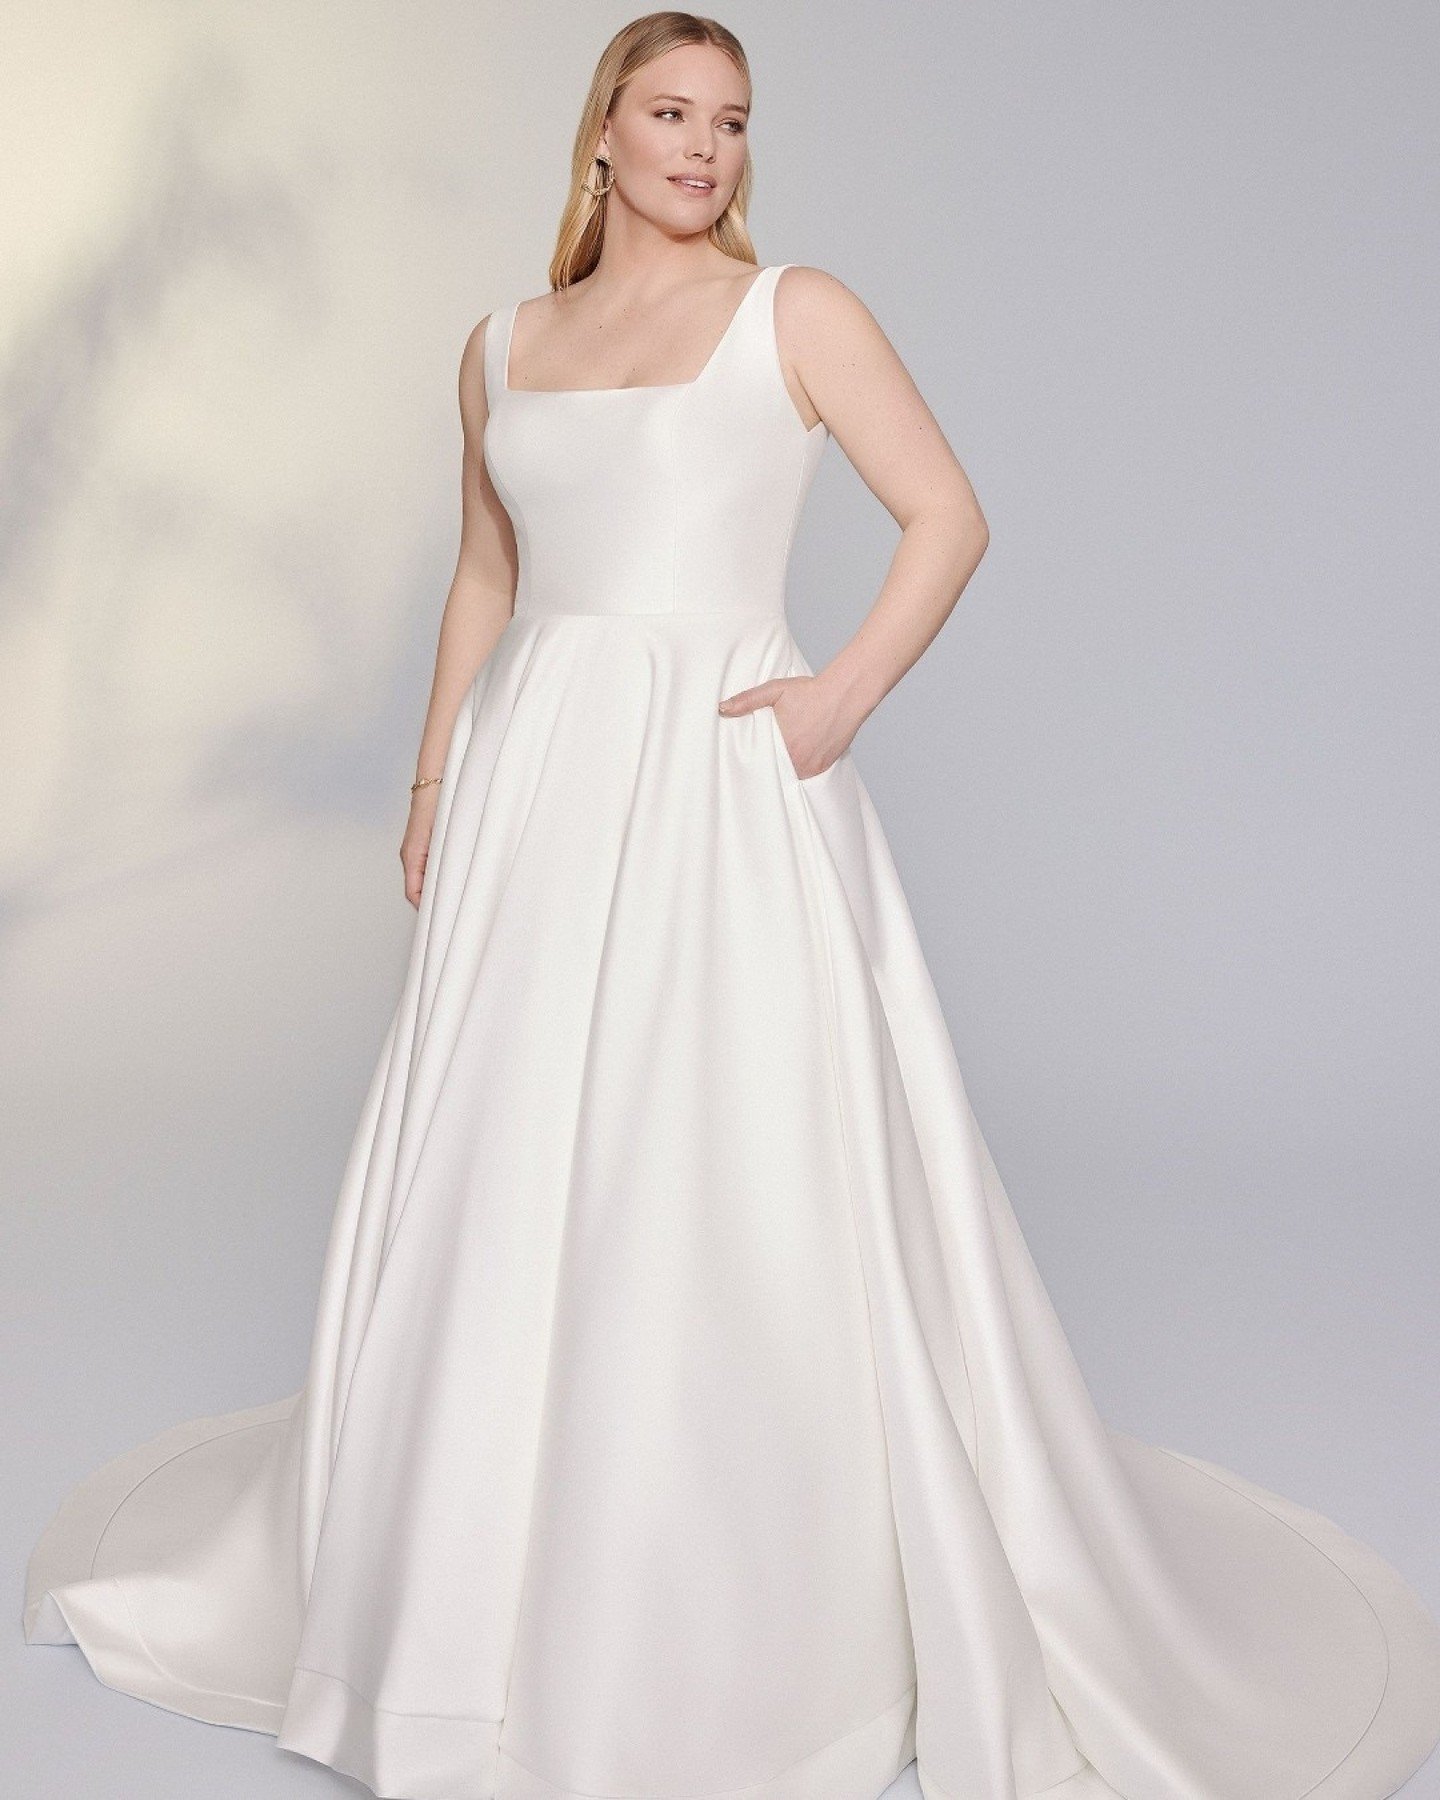 The first of our Justin Alexander Signature dresses is on it's way!

Look gorgeous on your wedding day wearing this simply chic stretch Mikado ball gown. 

Featuring a flattering square neckline and square back. The natural waistline leads to a full 